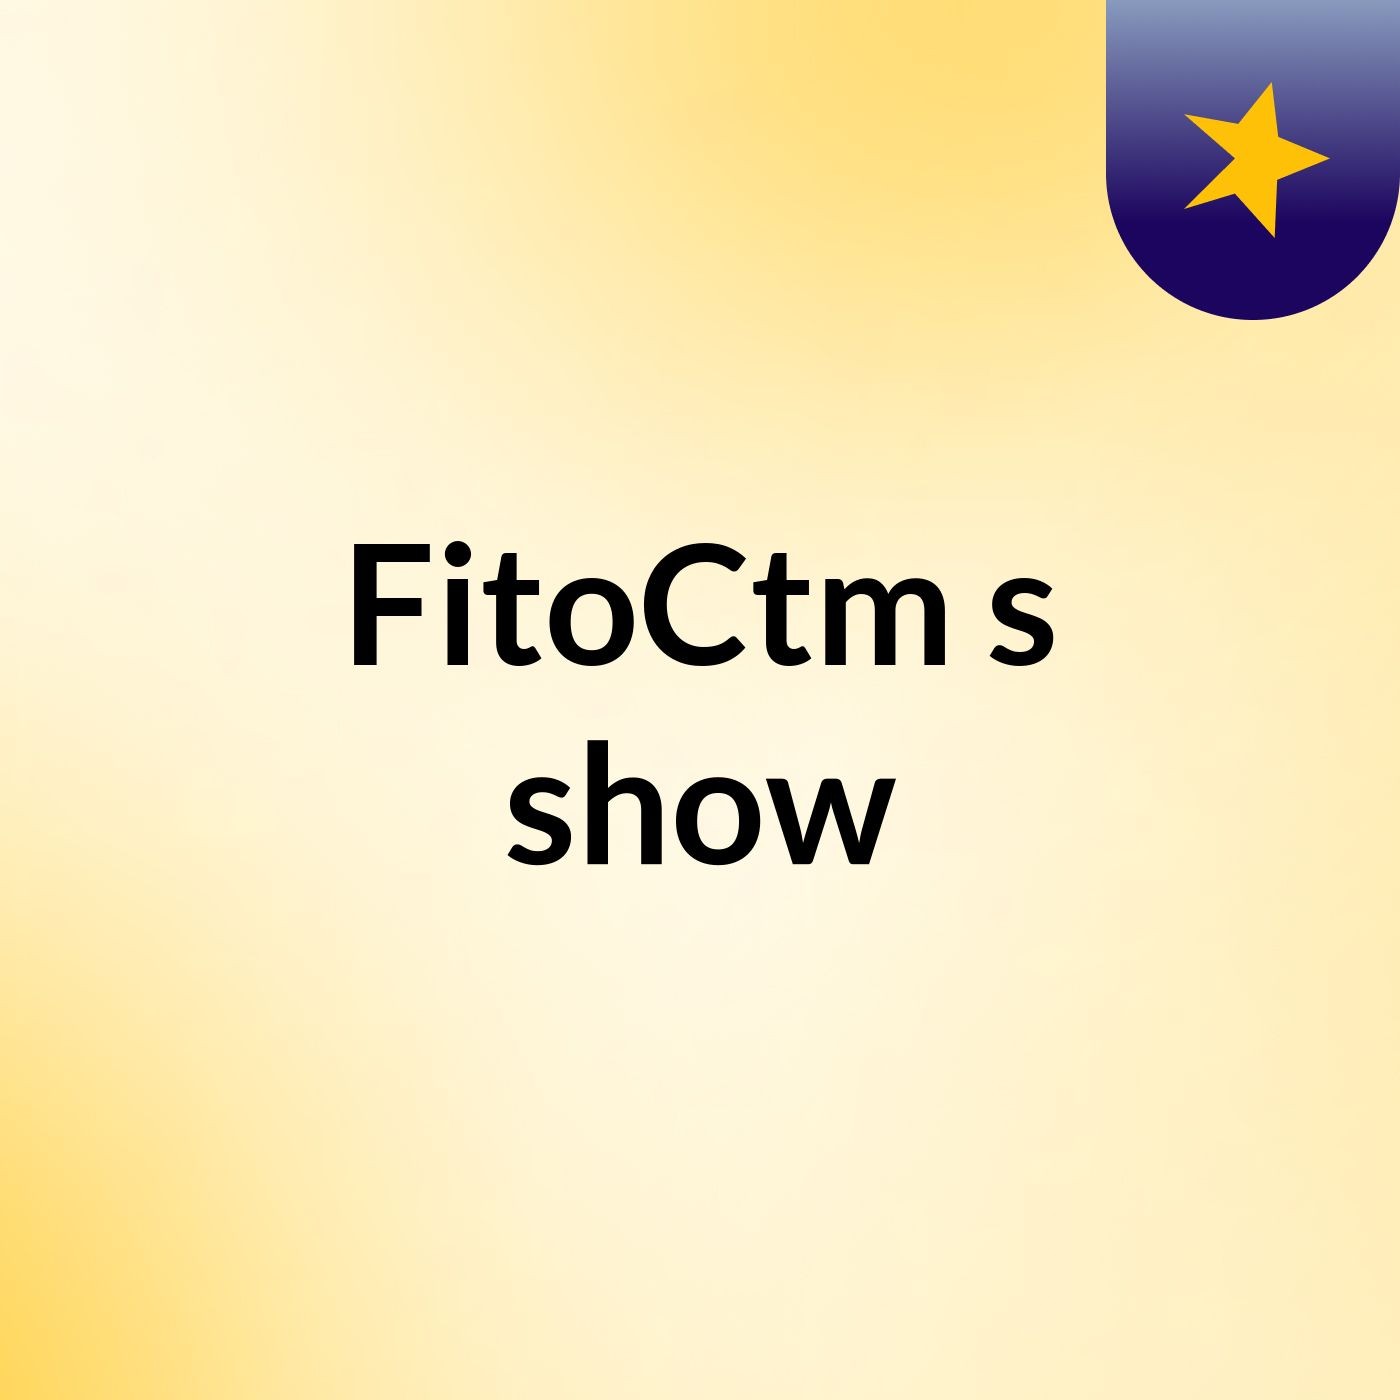 FitoCtm's show